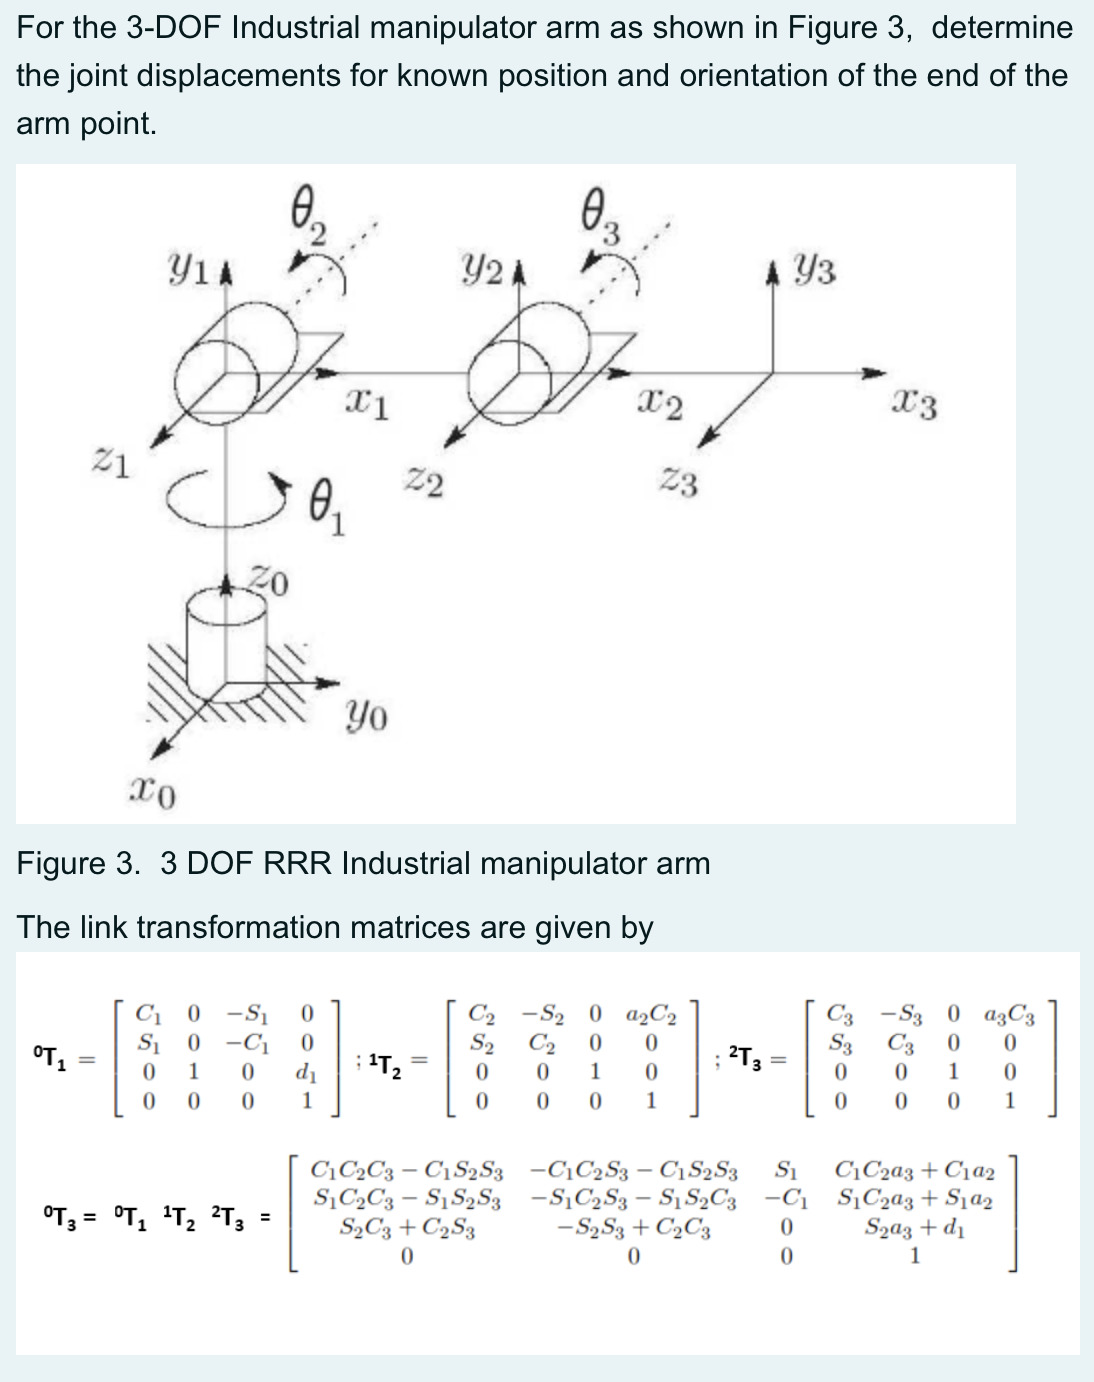 For the 3-DOF Industrial manipulator arm as shown in Figure 3, determine
the joint displacements for known position and orientation of the end of the
arm point.
0.
0.
Y1A
Y2 A
Y3
X2
X3
21
22
23
Yo
xo
Figure 3. 3 DOF RRR Industrial manipulator arm
The link transformation matrices are given by
C3 -S3 0 a3C3
S3 C3
1
C2 -S2 0 a,C2
C1
S1
-S1
-C1
d1
S2
C2
2T3
%3D
T2
1
1
1
1
1
S1
C\C2a3+C1a2
C1C2C3 – C1S2S3 -C¡C2S3 – C1S2S3
S,C2C3 – S1S2S3 -SĄC2S3 – S1 S2C3 -C1 SịC2a3+ Sja2
Szaz + d1
1
OT3 =
= °T, 'T2 ?T3
S½C3 + C2S3
- S2S3 + C2C3
